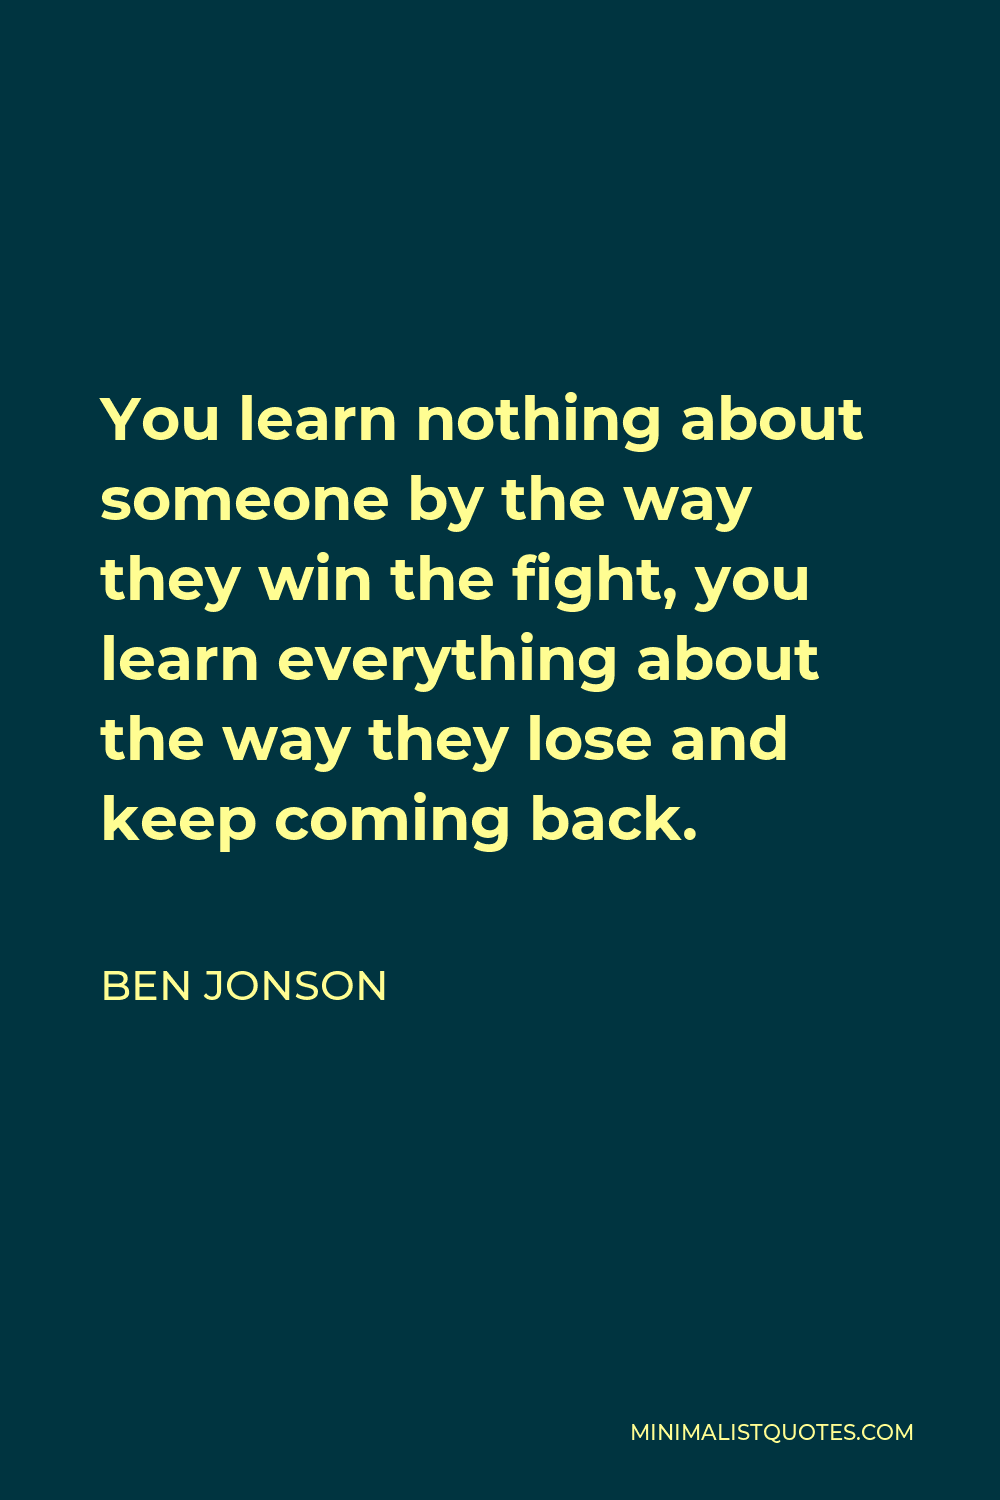 Ben Jonson Quote - You learn nothing about someone by the way they win the fight, you learn everything about the way they lose and keep coming back.